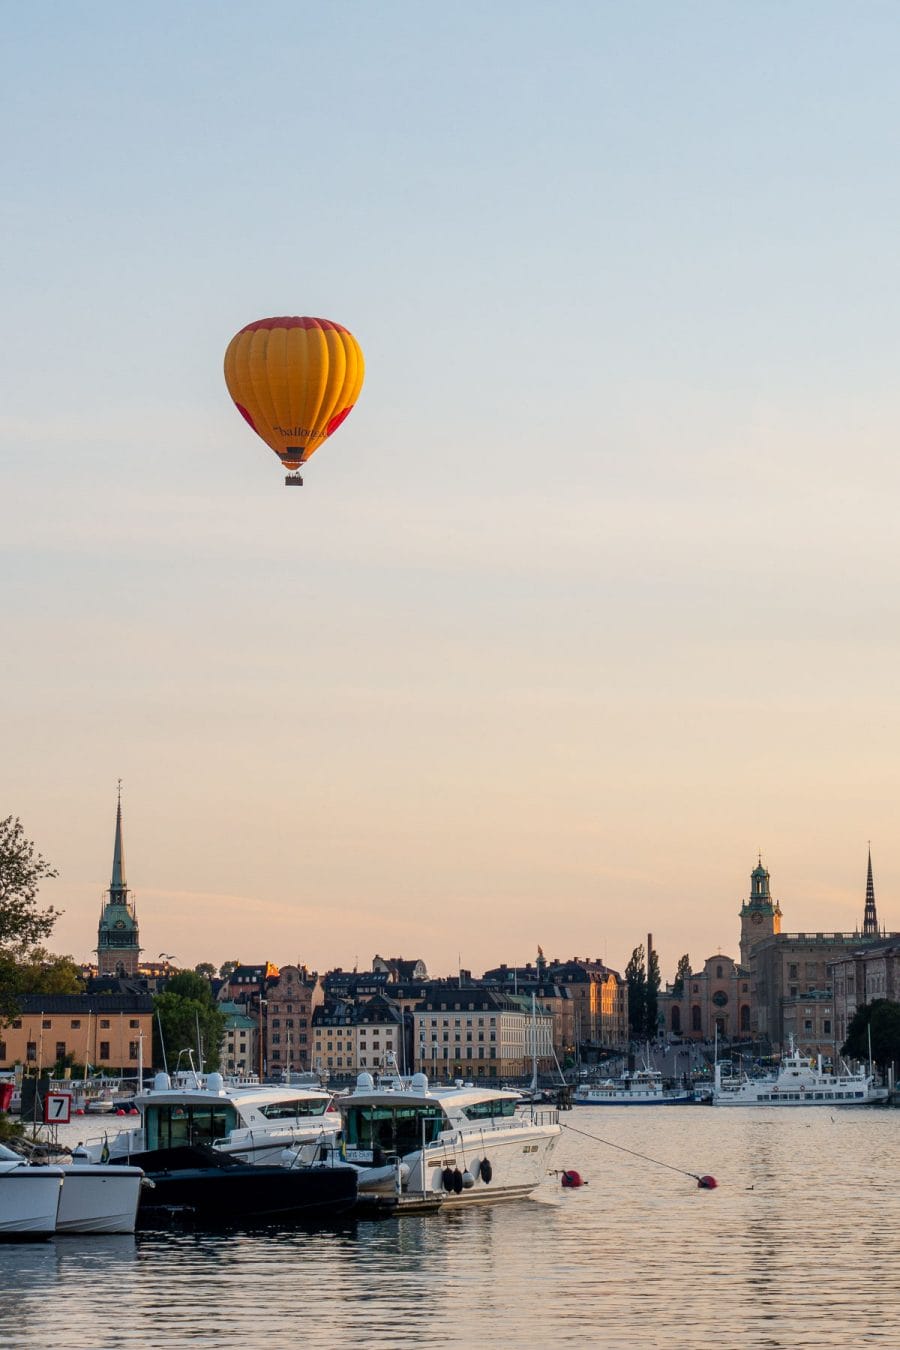 Hot air balloon over Stockholm